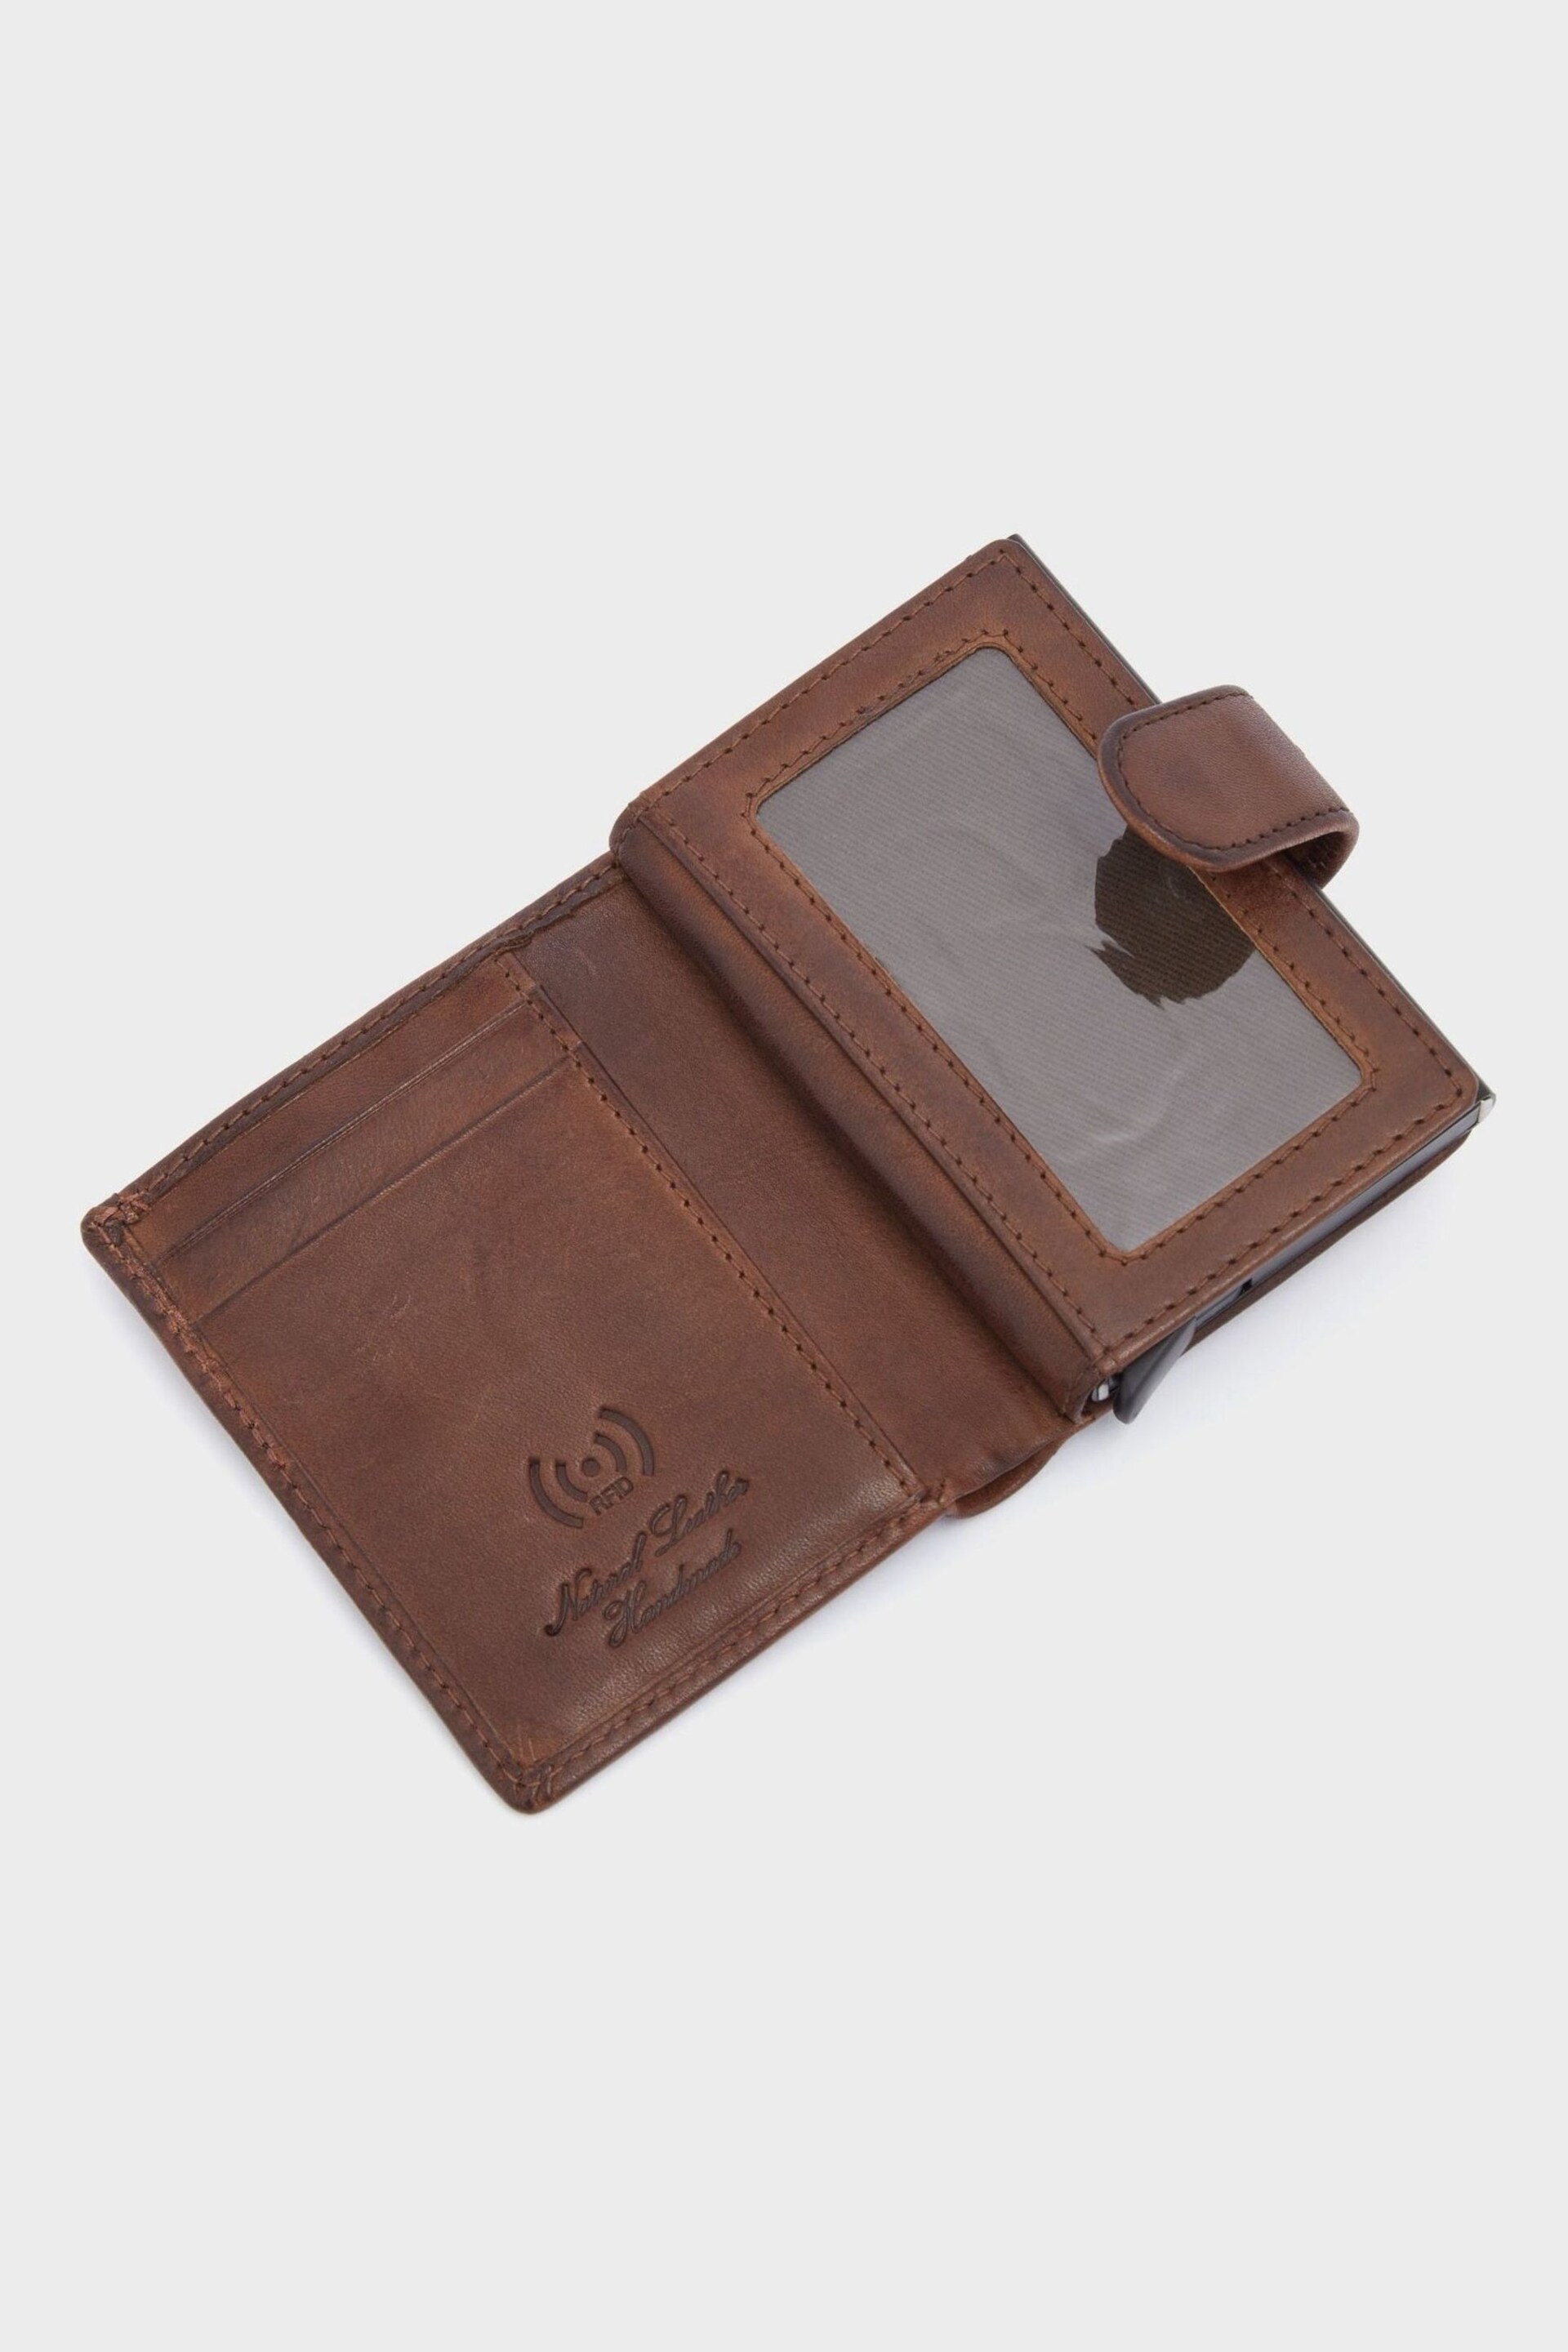 OSPREY LONDON The X Stitch Leather & Metal RFID ID Brown Card Case - Image 4 of 6